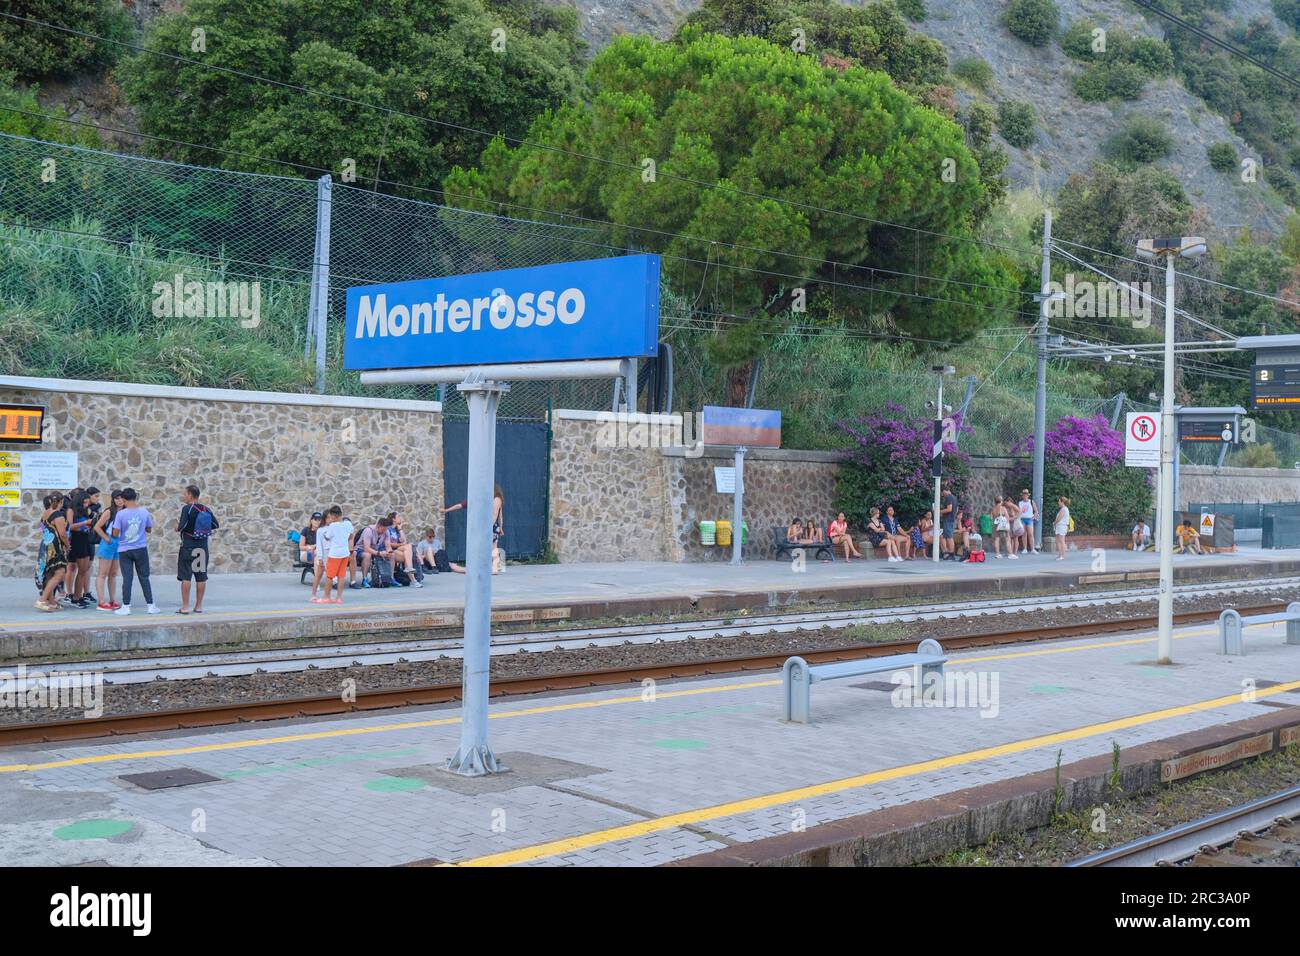 June 2023 Monterosso, Italy: Monterosso sign on the railway platform across the trains, station infrastructure, and passengers with suitcases Stock Photo